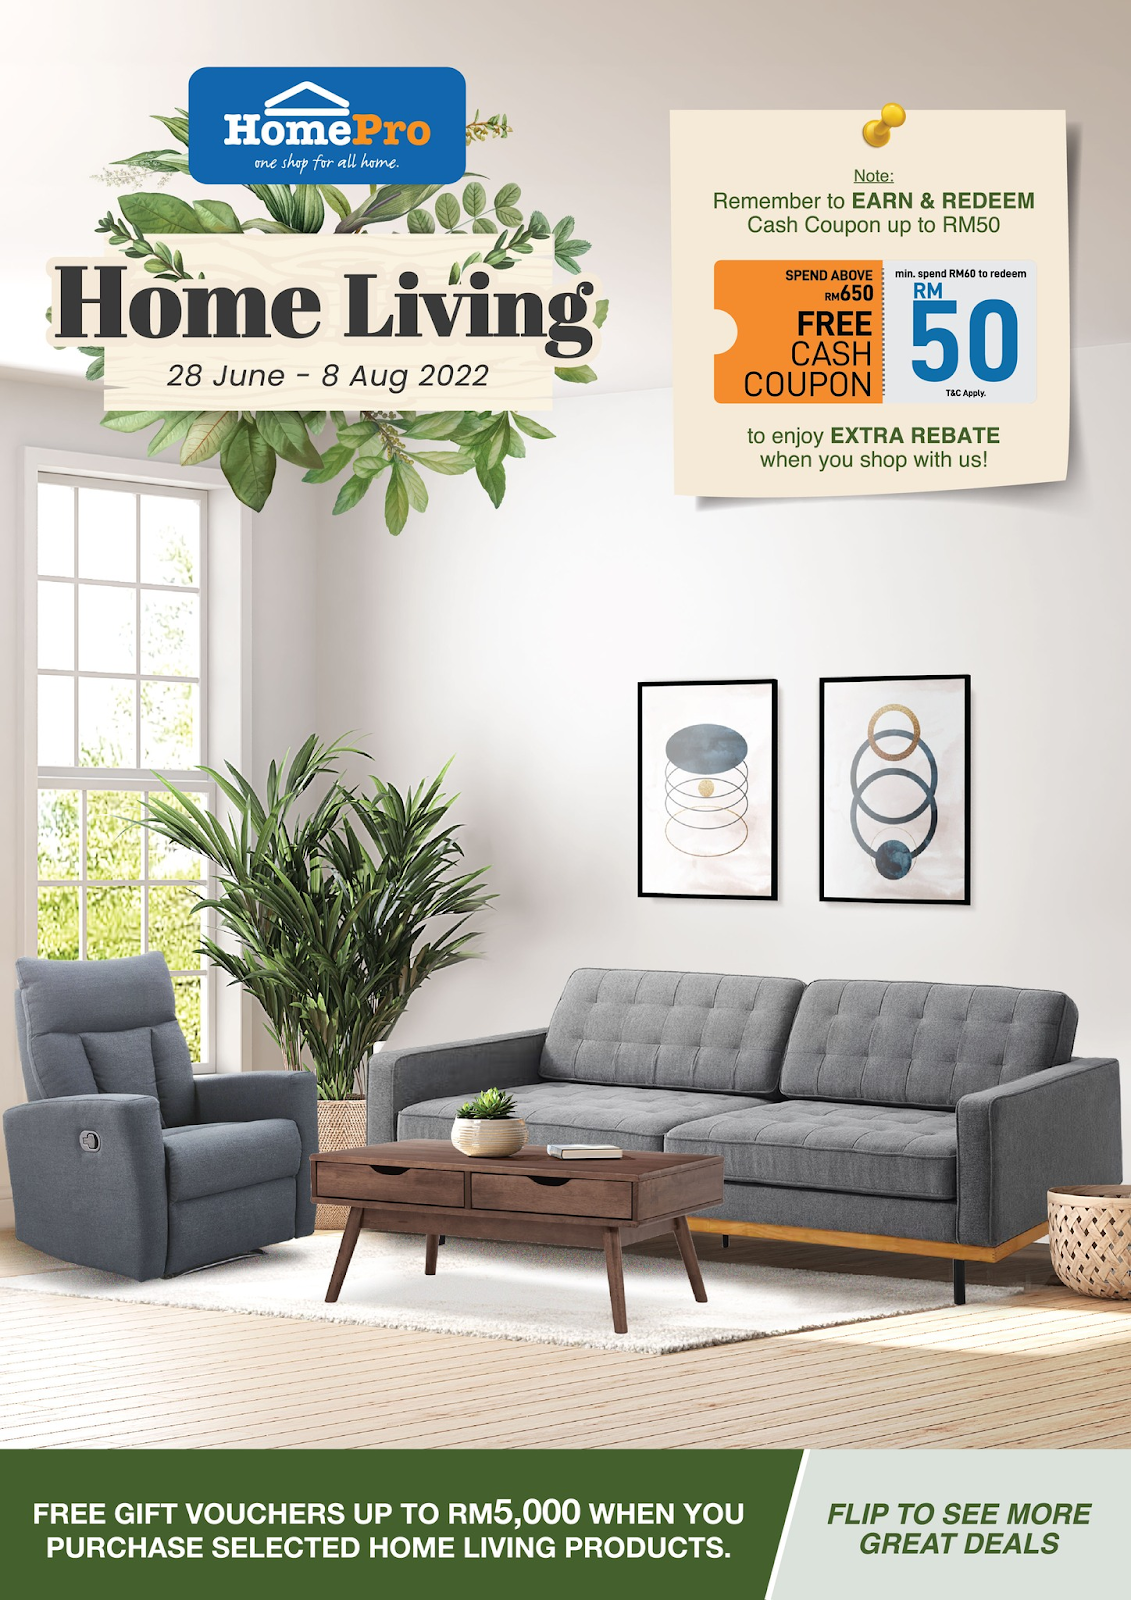 HomePro Home Living Sale